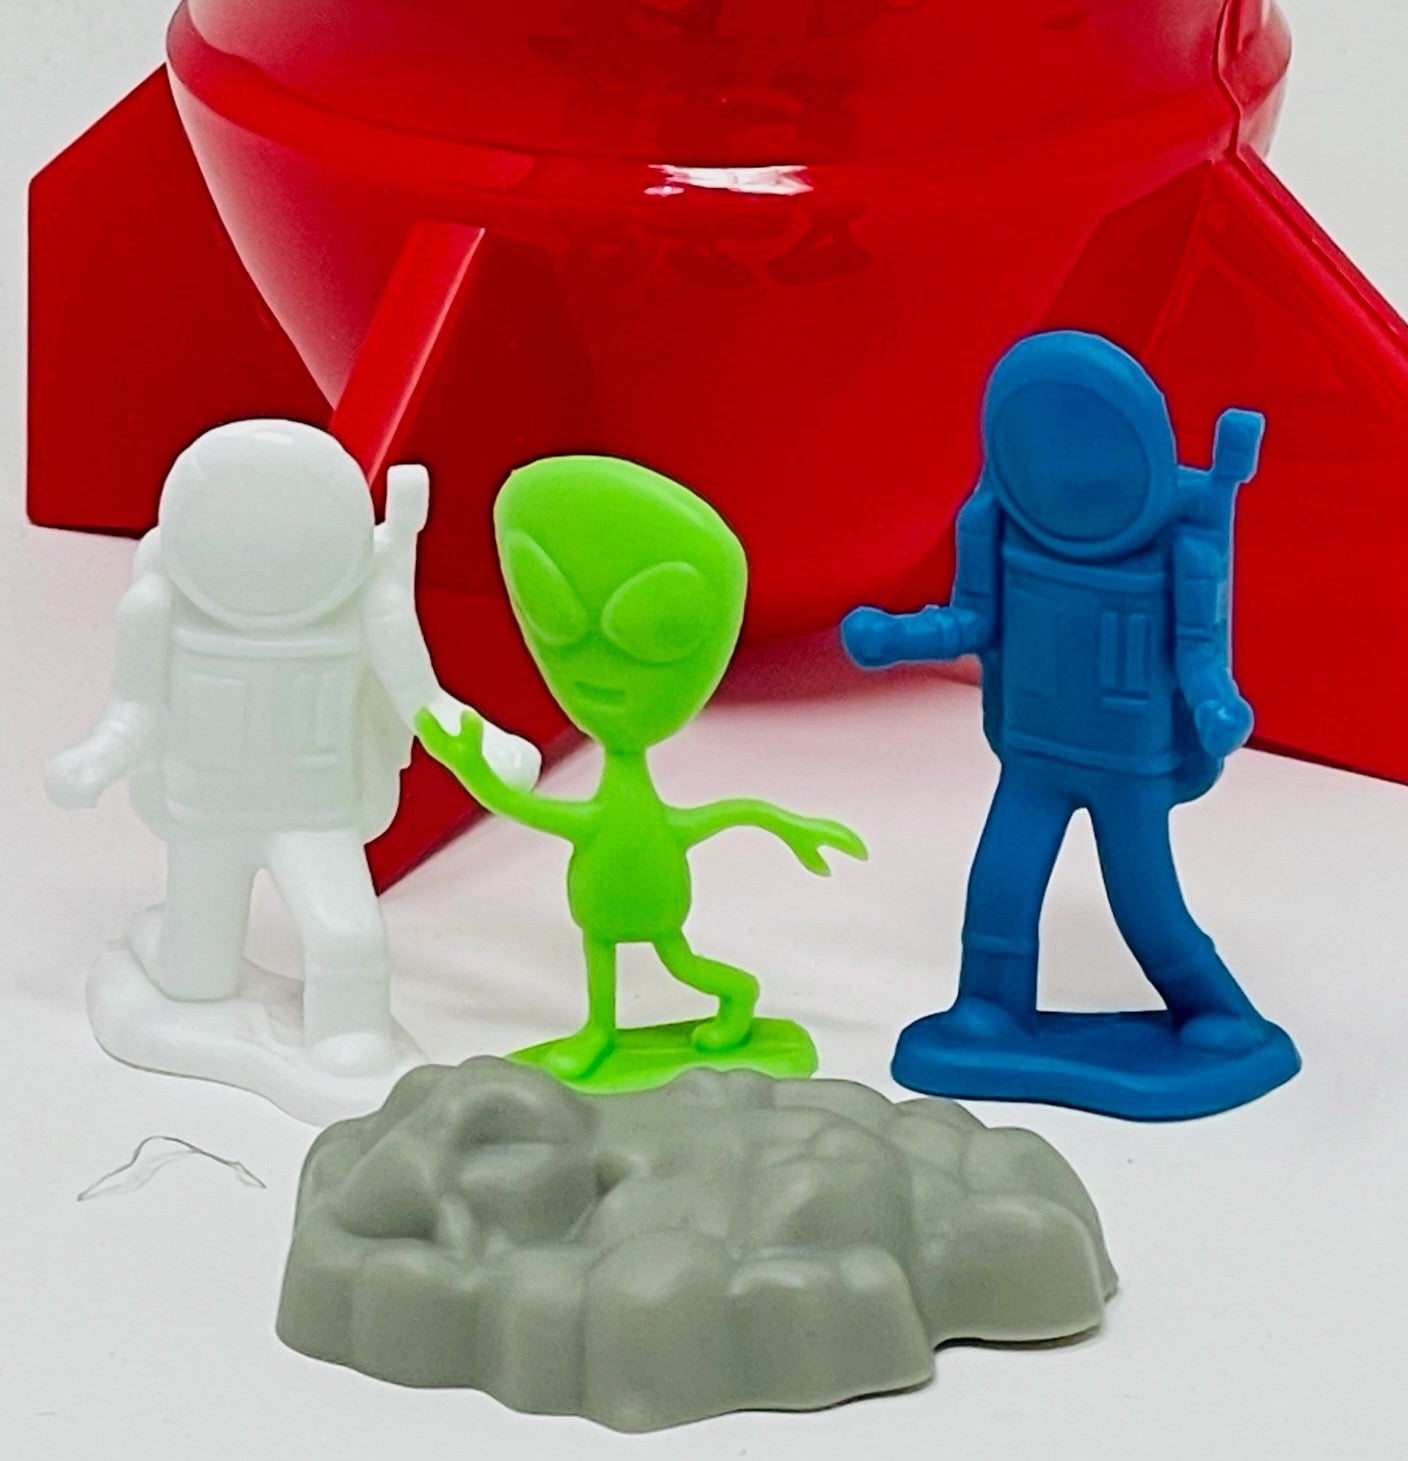 Space Galaxy Figures with GID stars